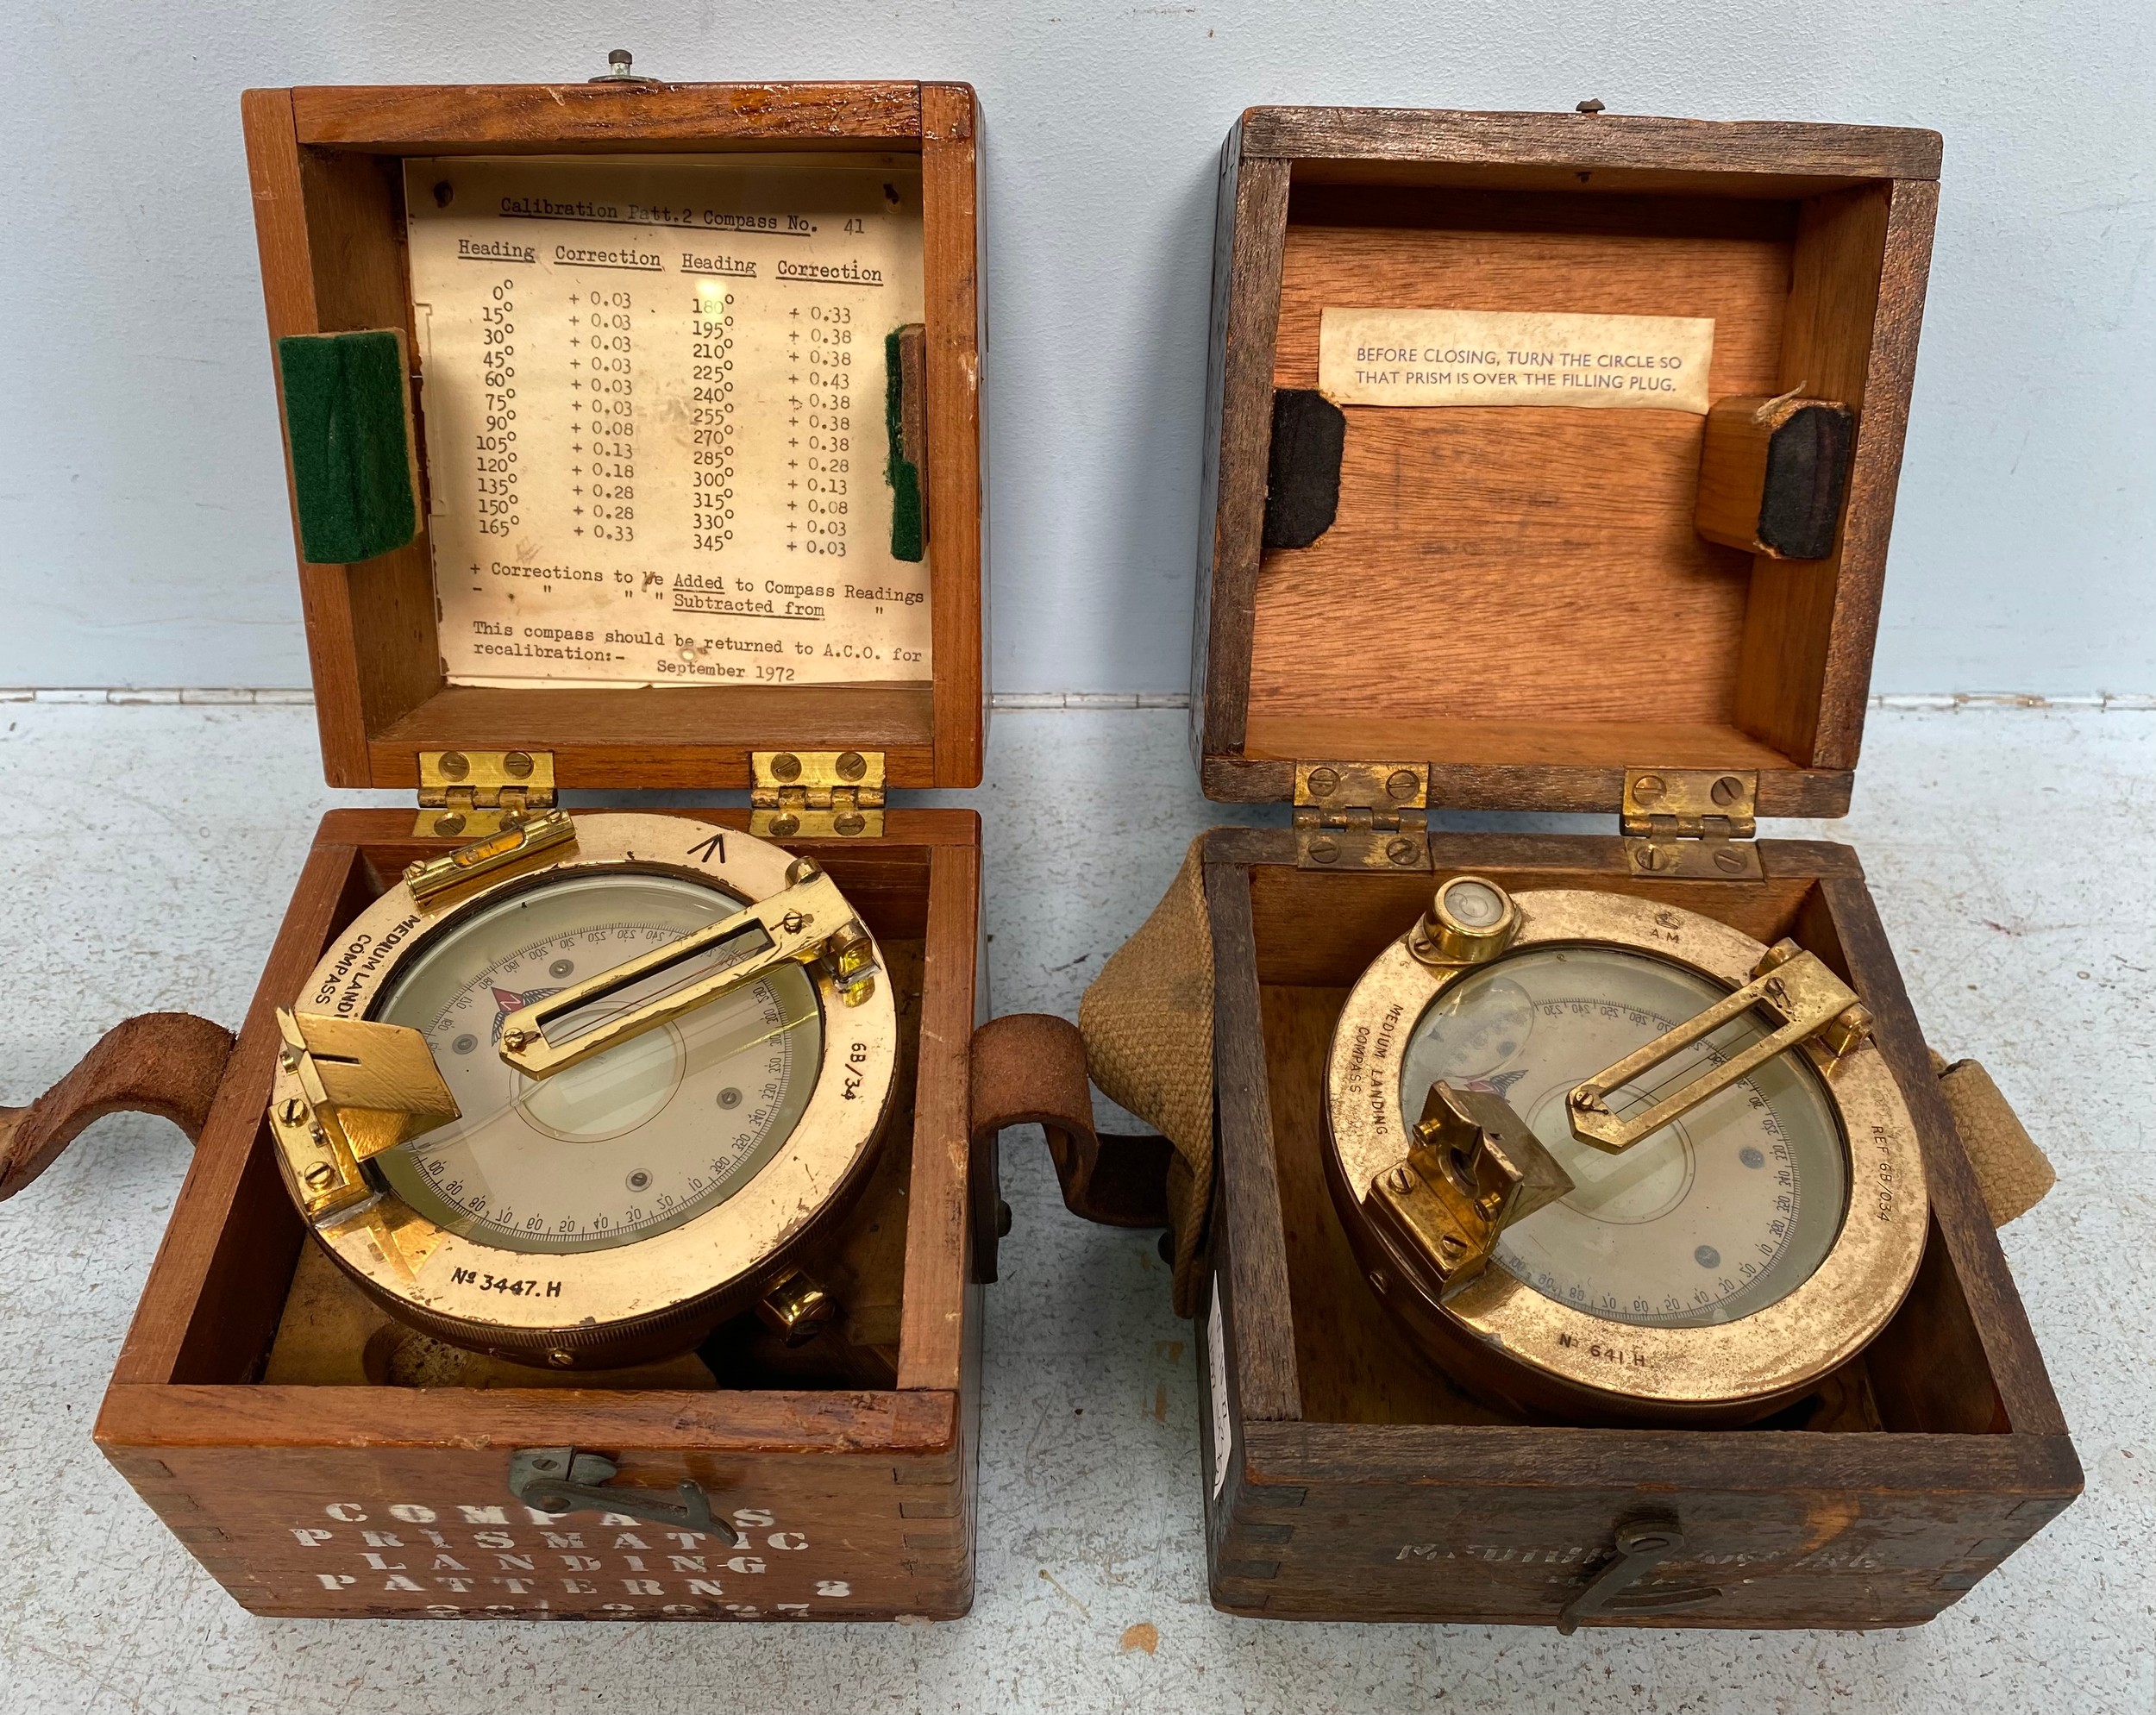 Two various brass Adnirlaty Pattern Medium Landing Compasses, in fitted wooden protectve storage